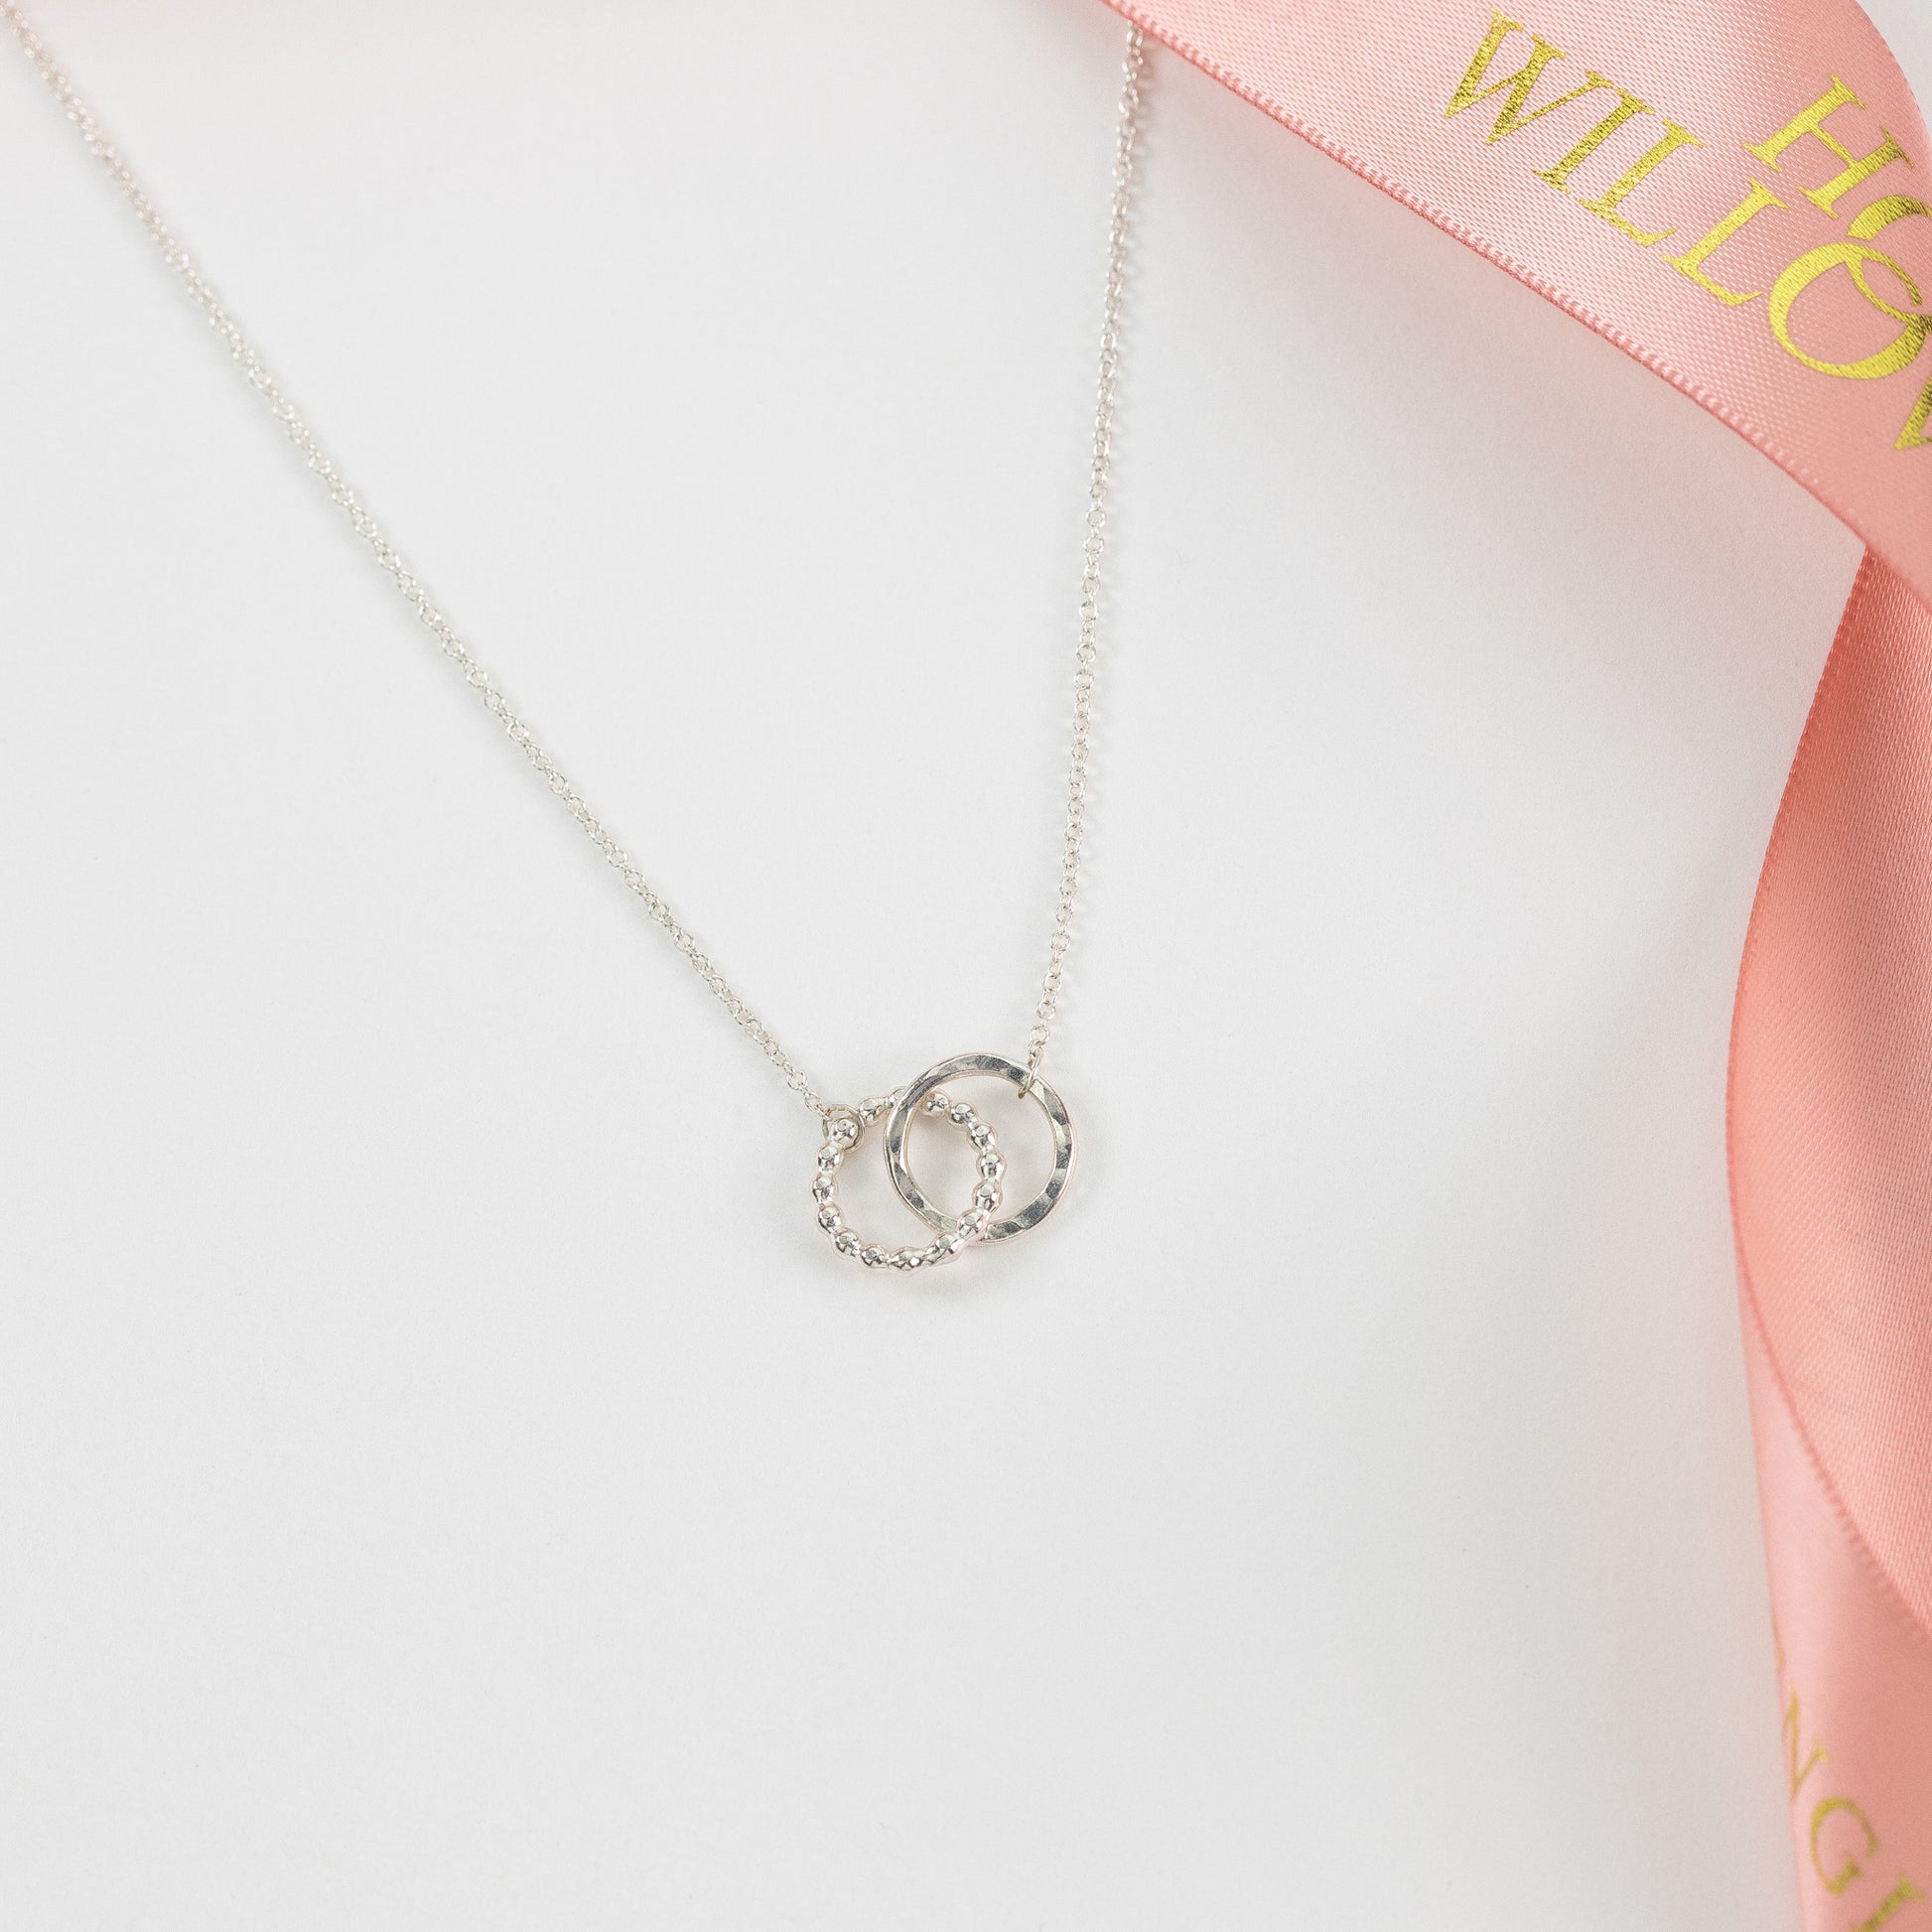 Love Link Necklace - Linked for a Lifetime - Silver